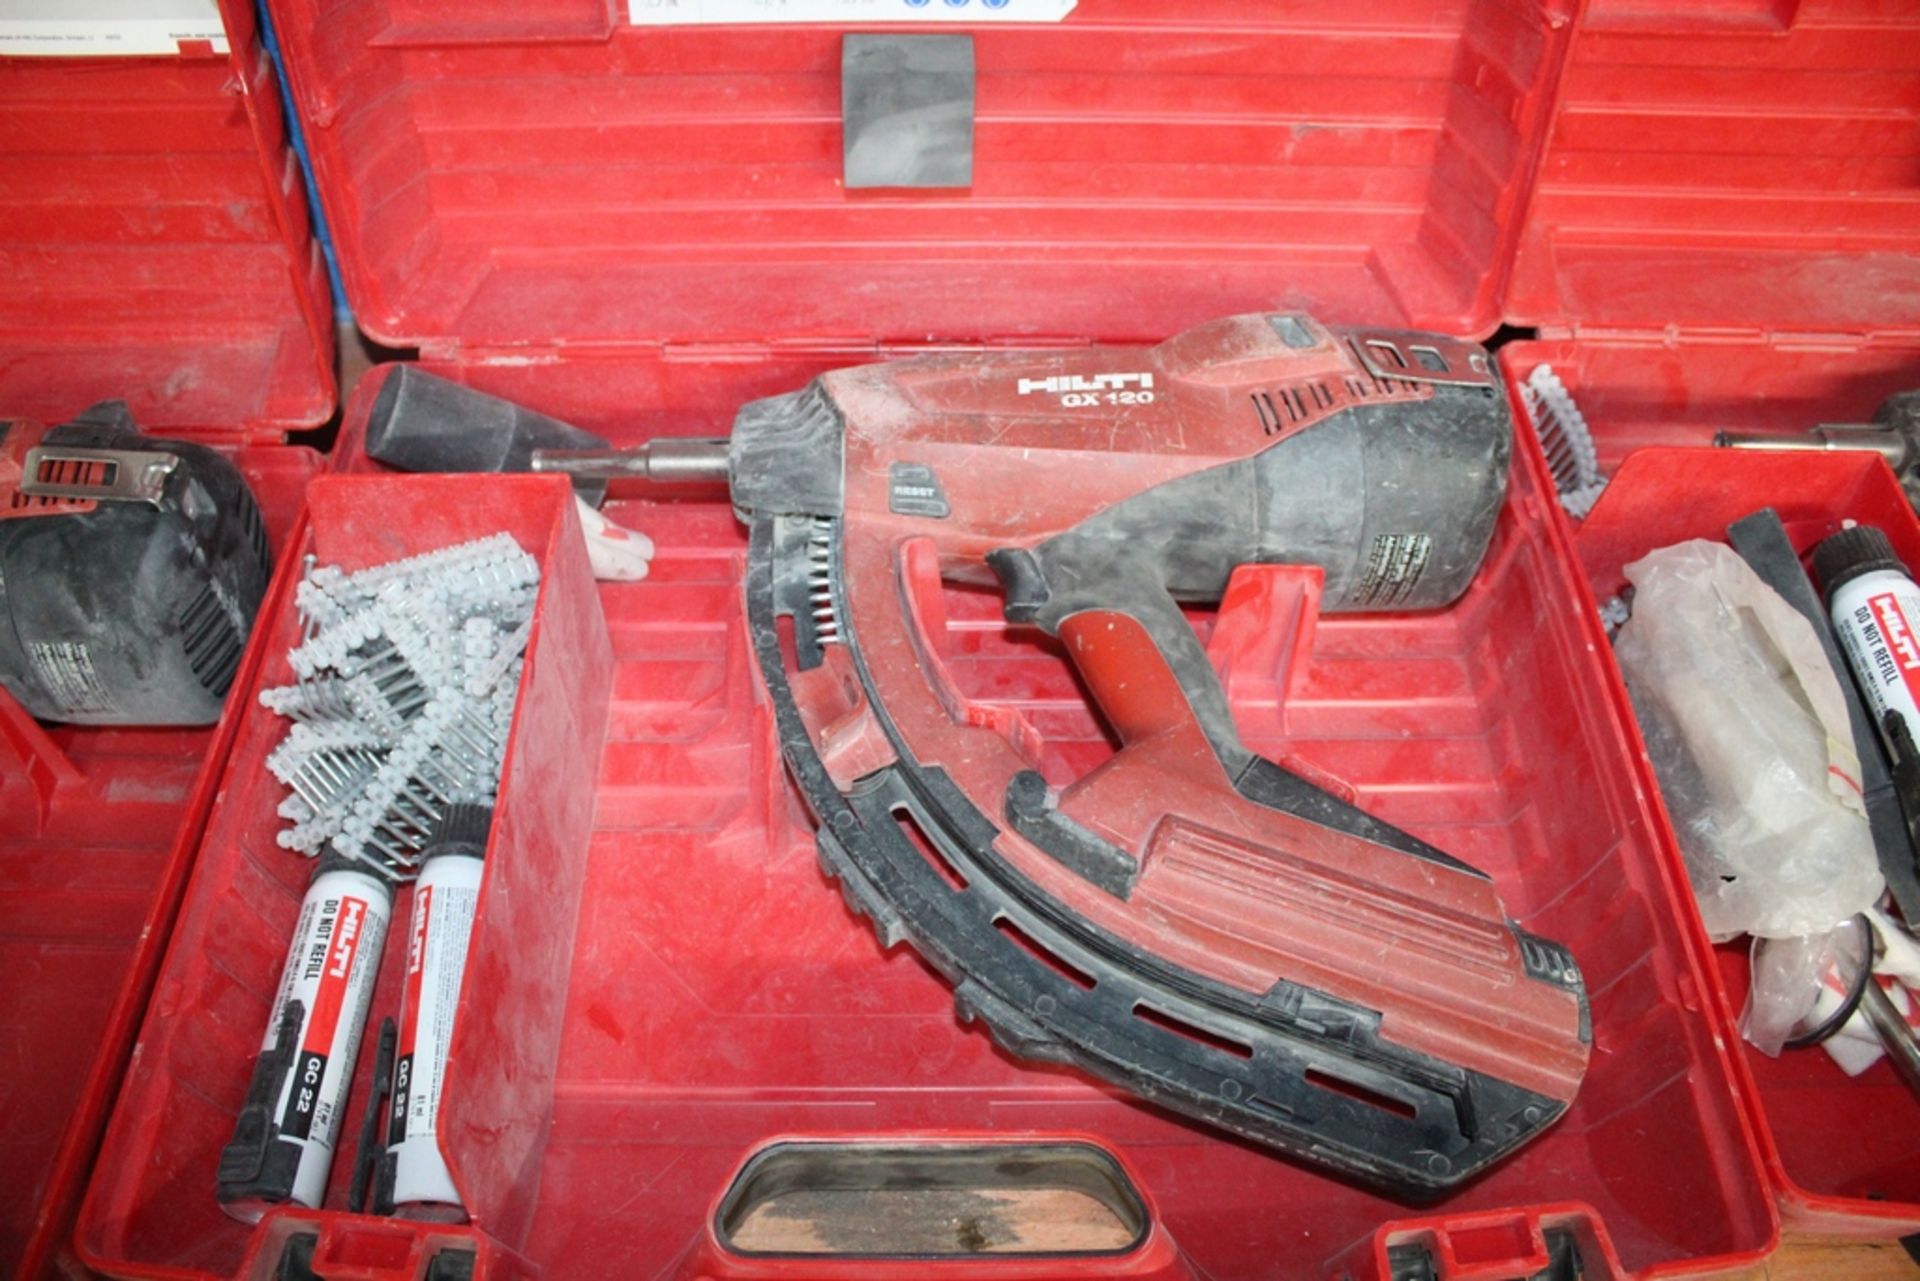 HILTI MODEL GX120 GAS ACTUATED NAIL GUN WITH CASE